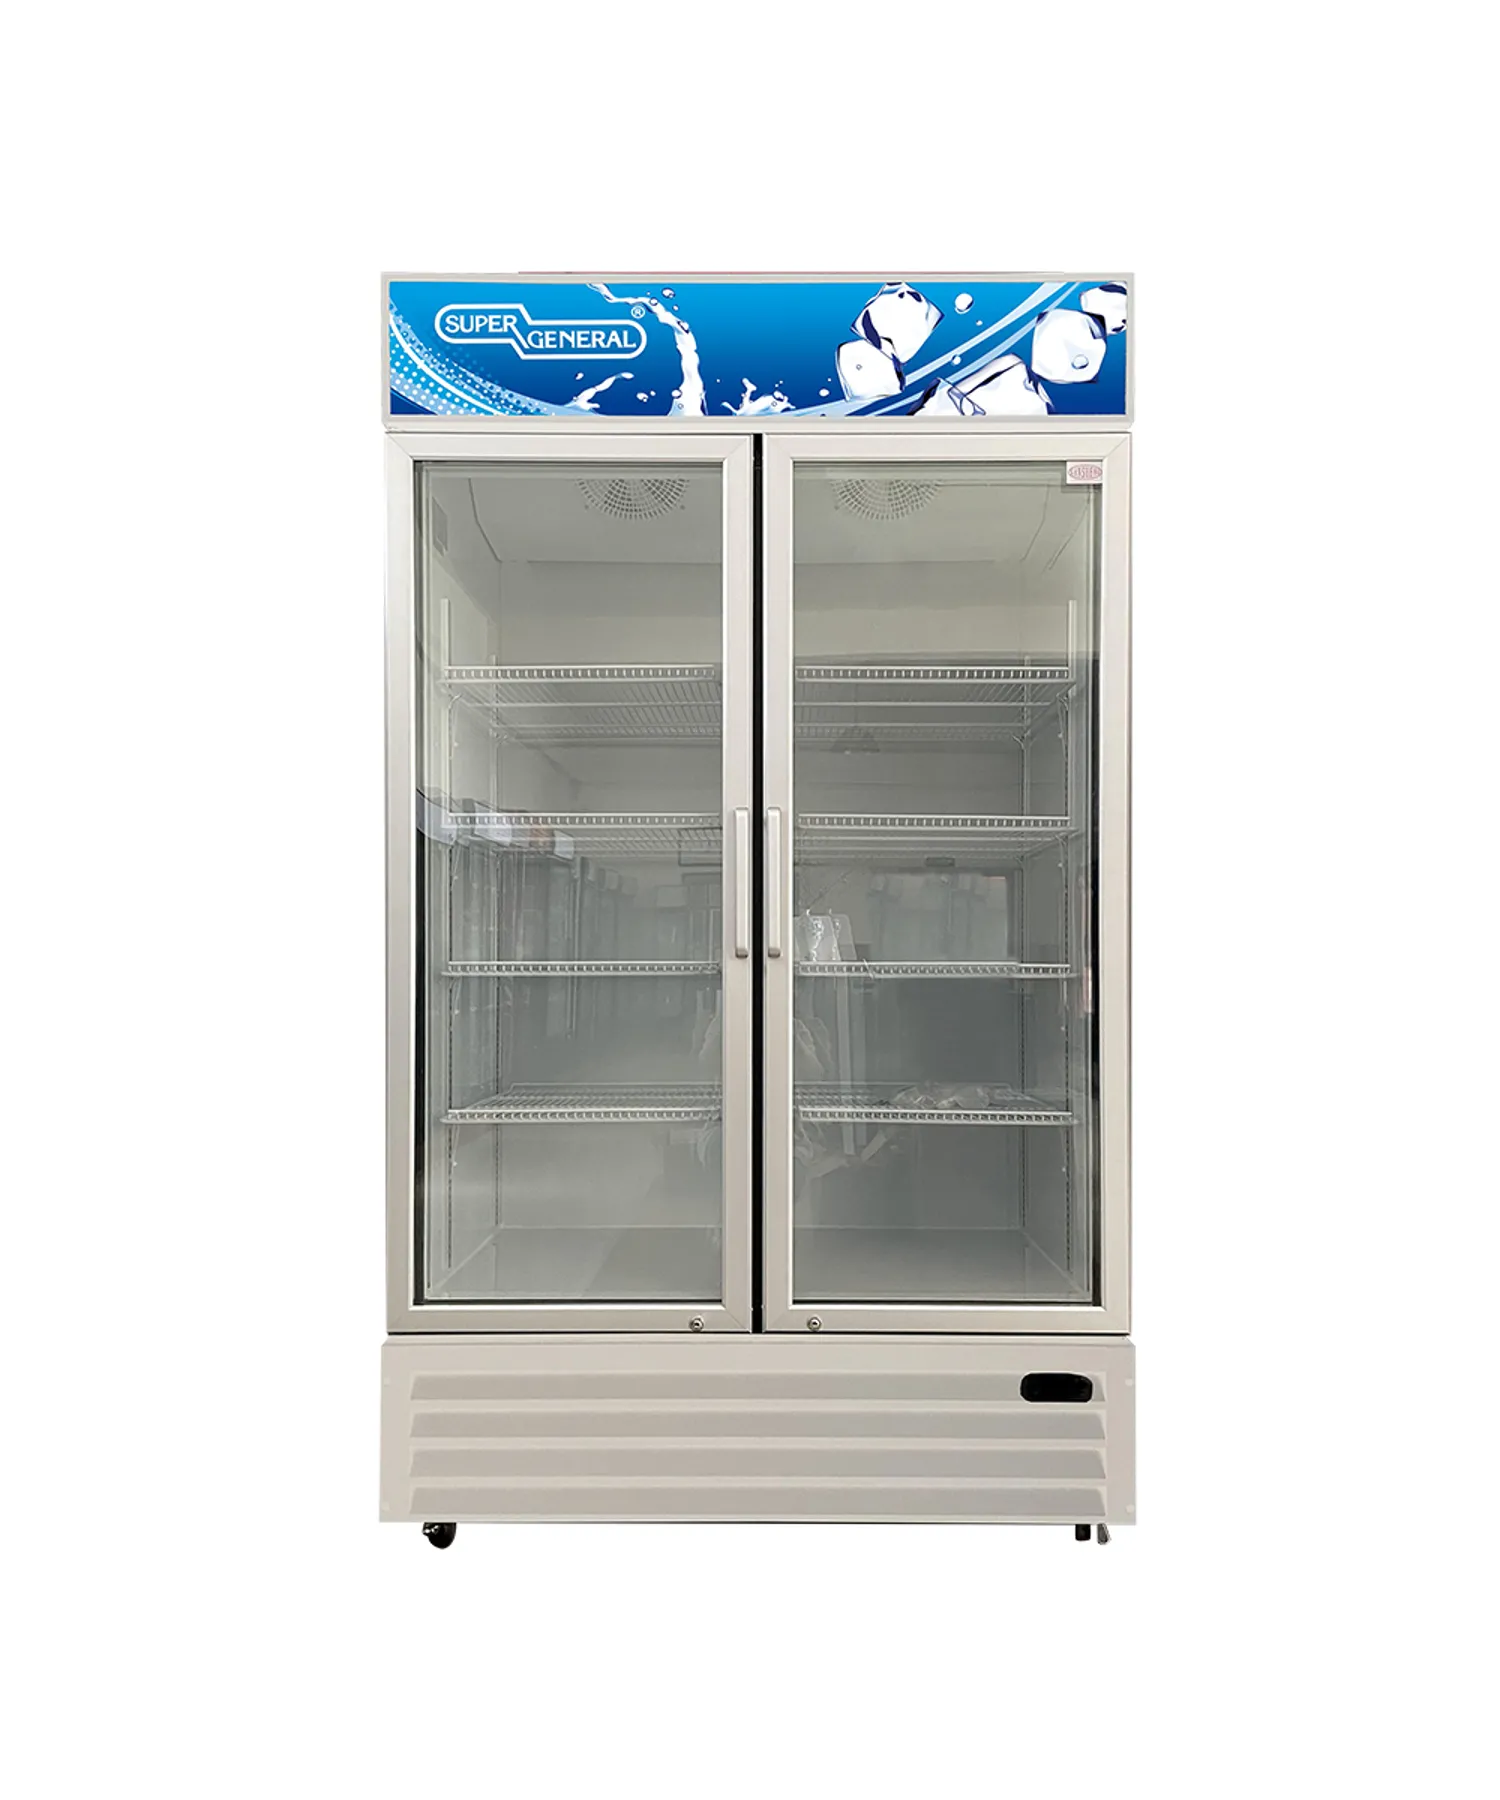 Super General 1000 Liter Double Door Chiller Color White Model – SGSC1220AIF – 1 Year Full 5 Years Compressor Warranty.